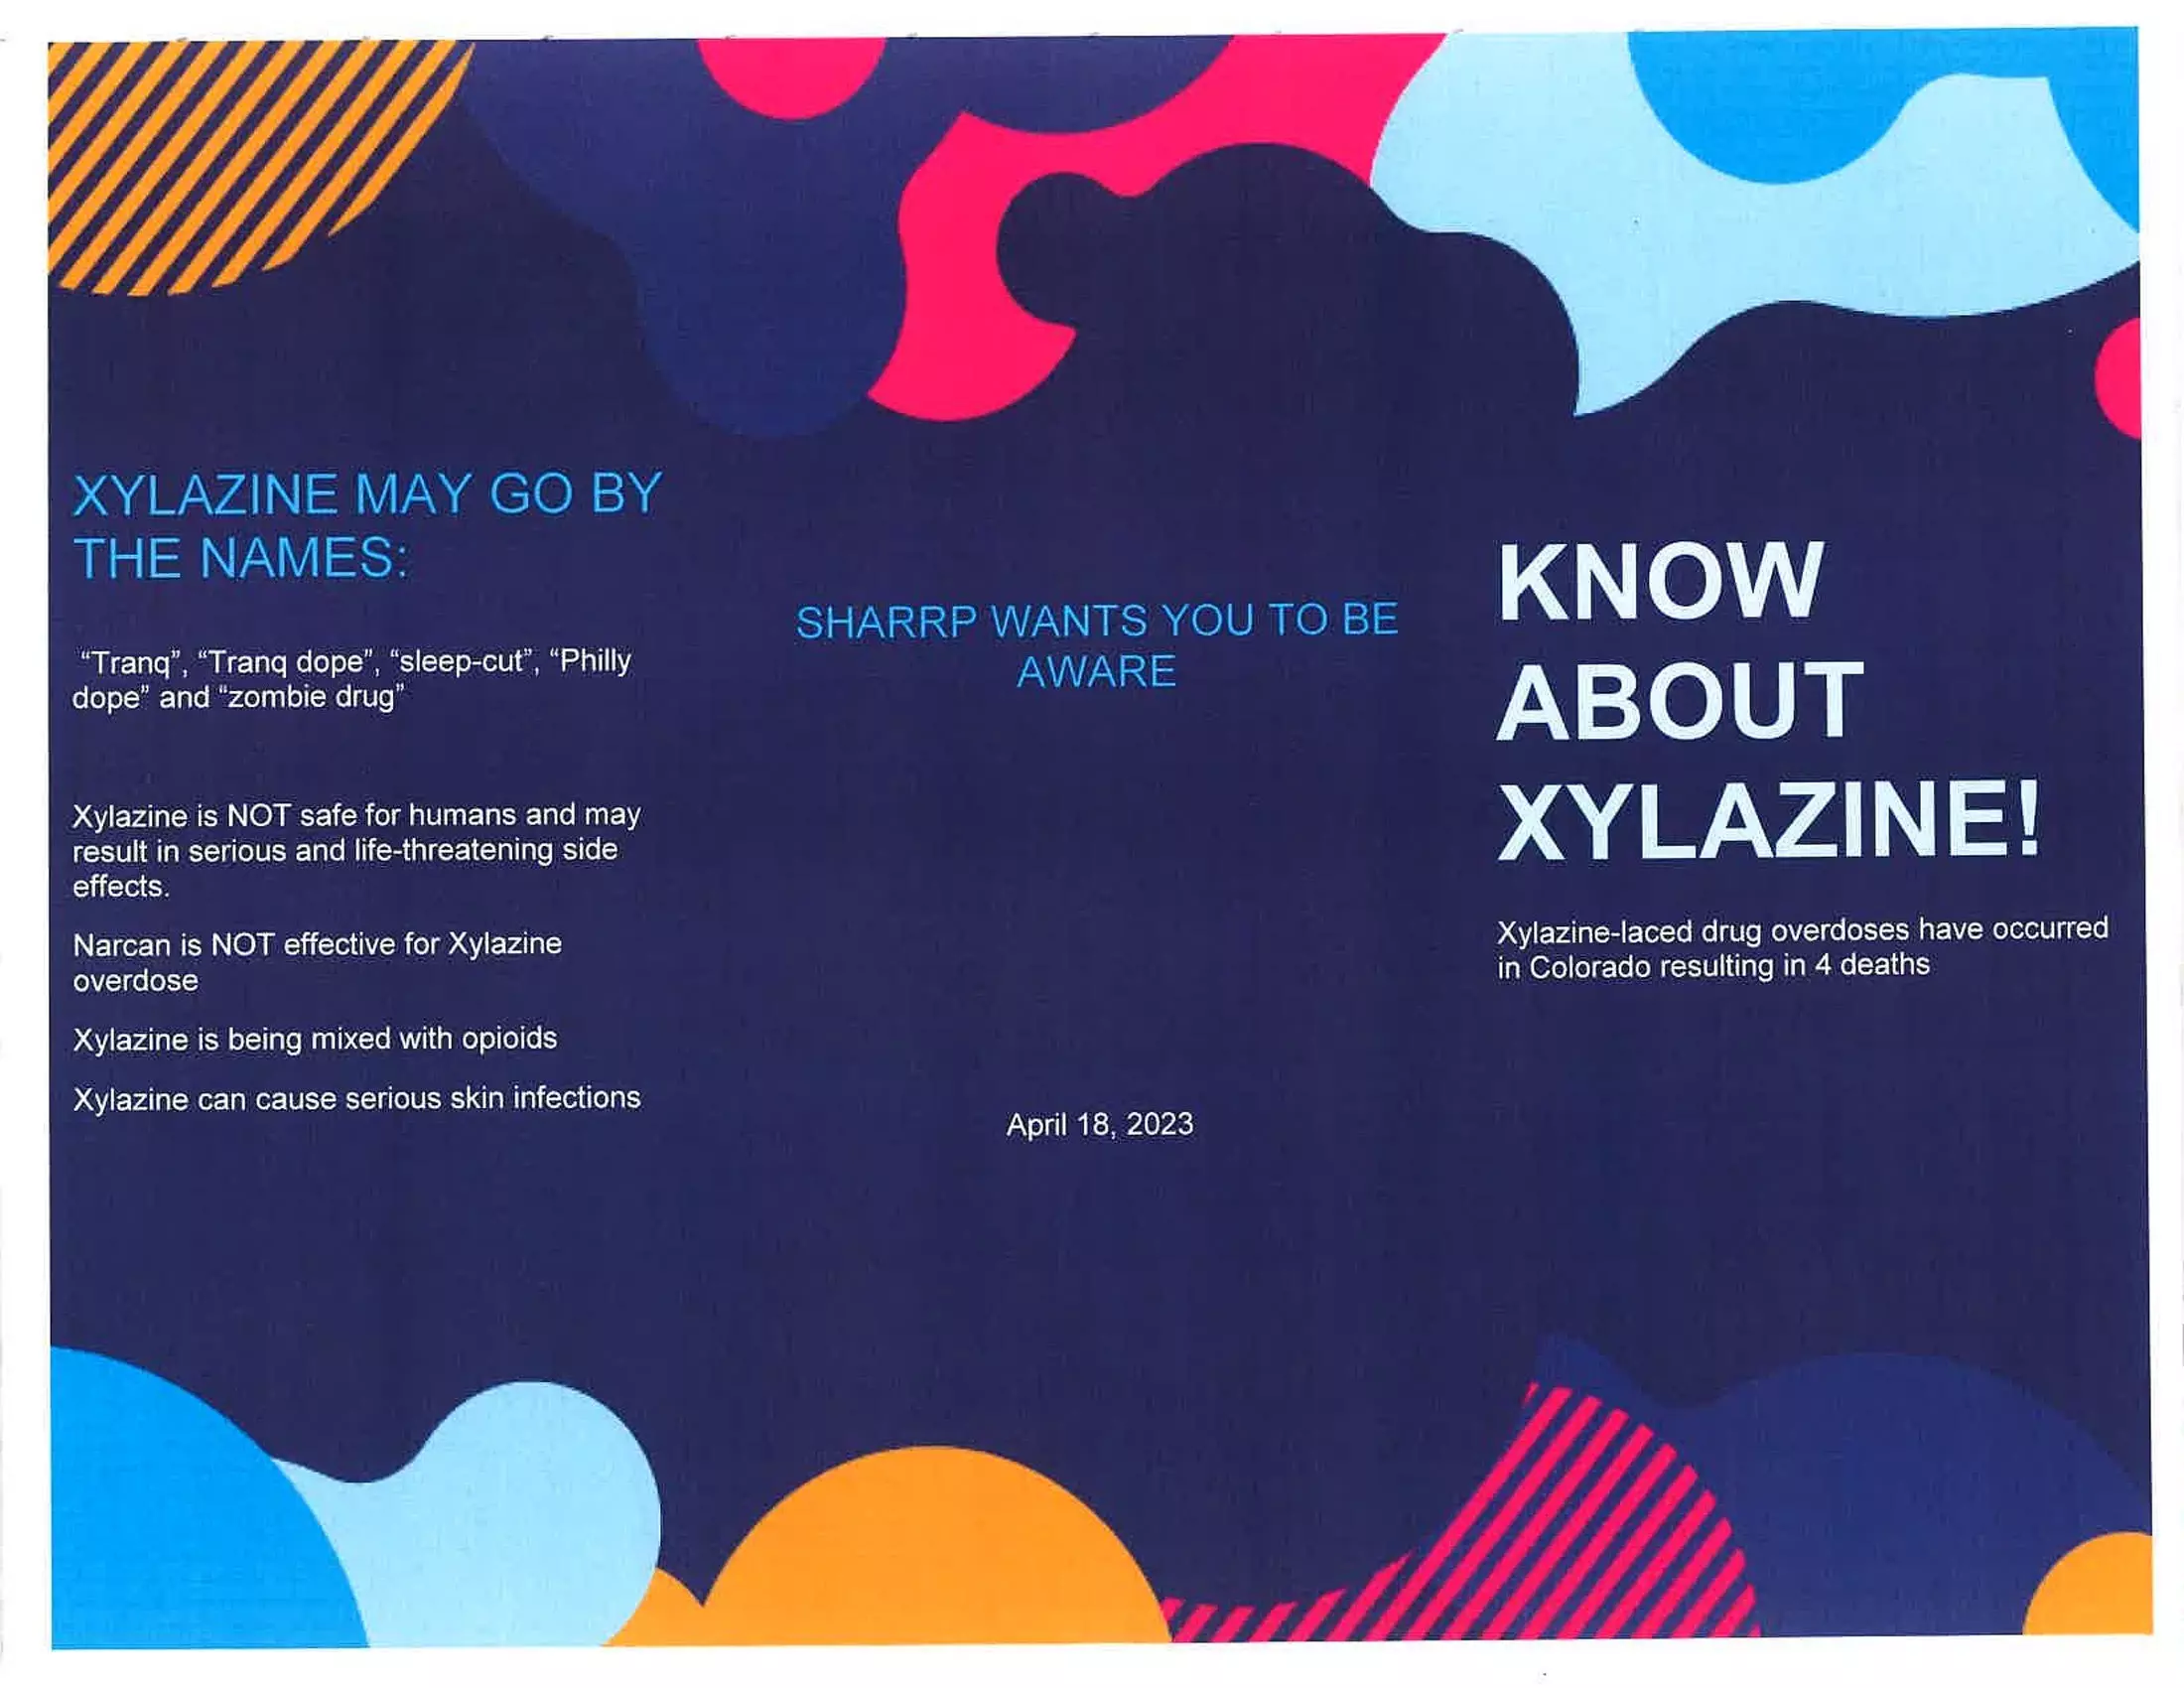 Sharps wants you to know about Xylazine